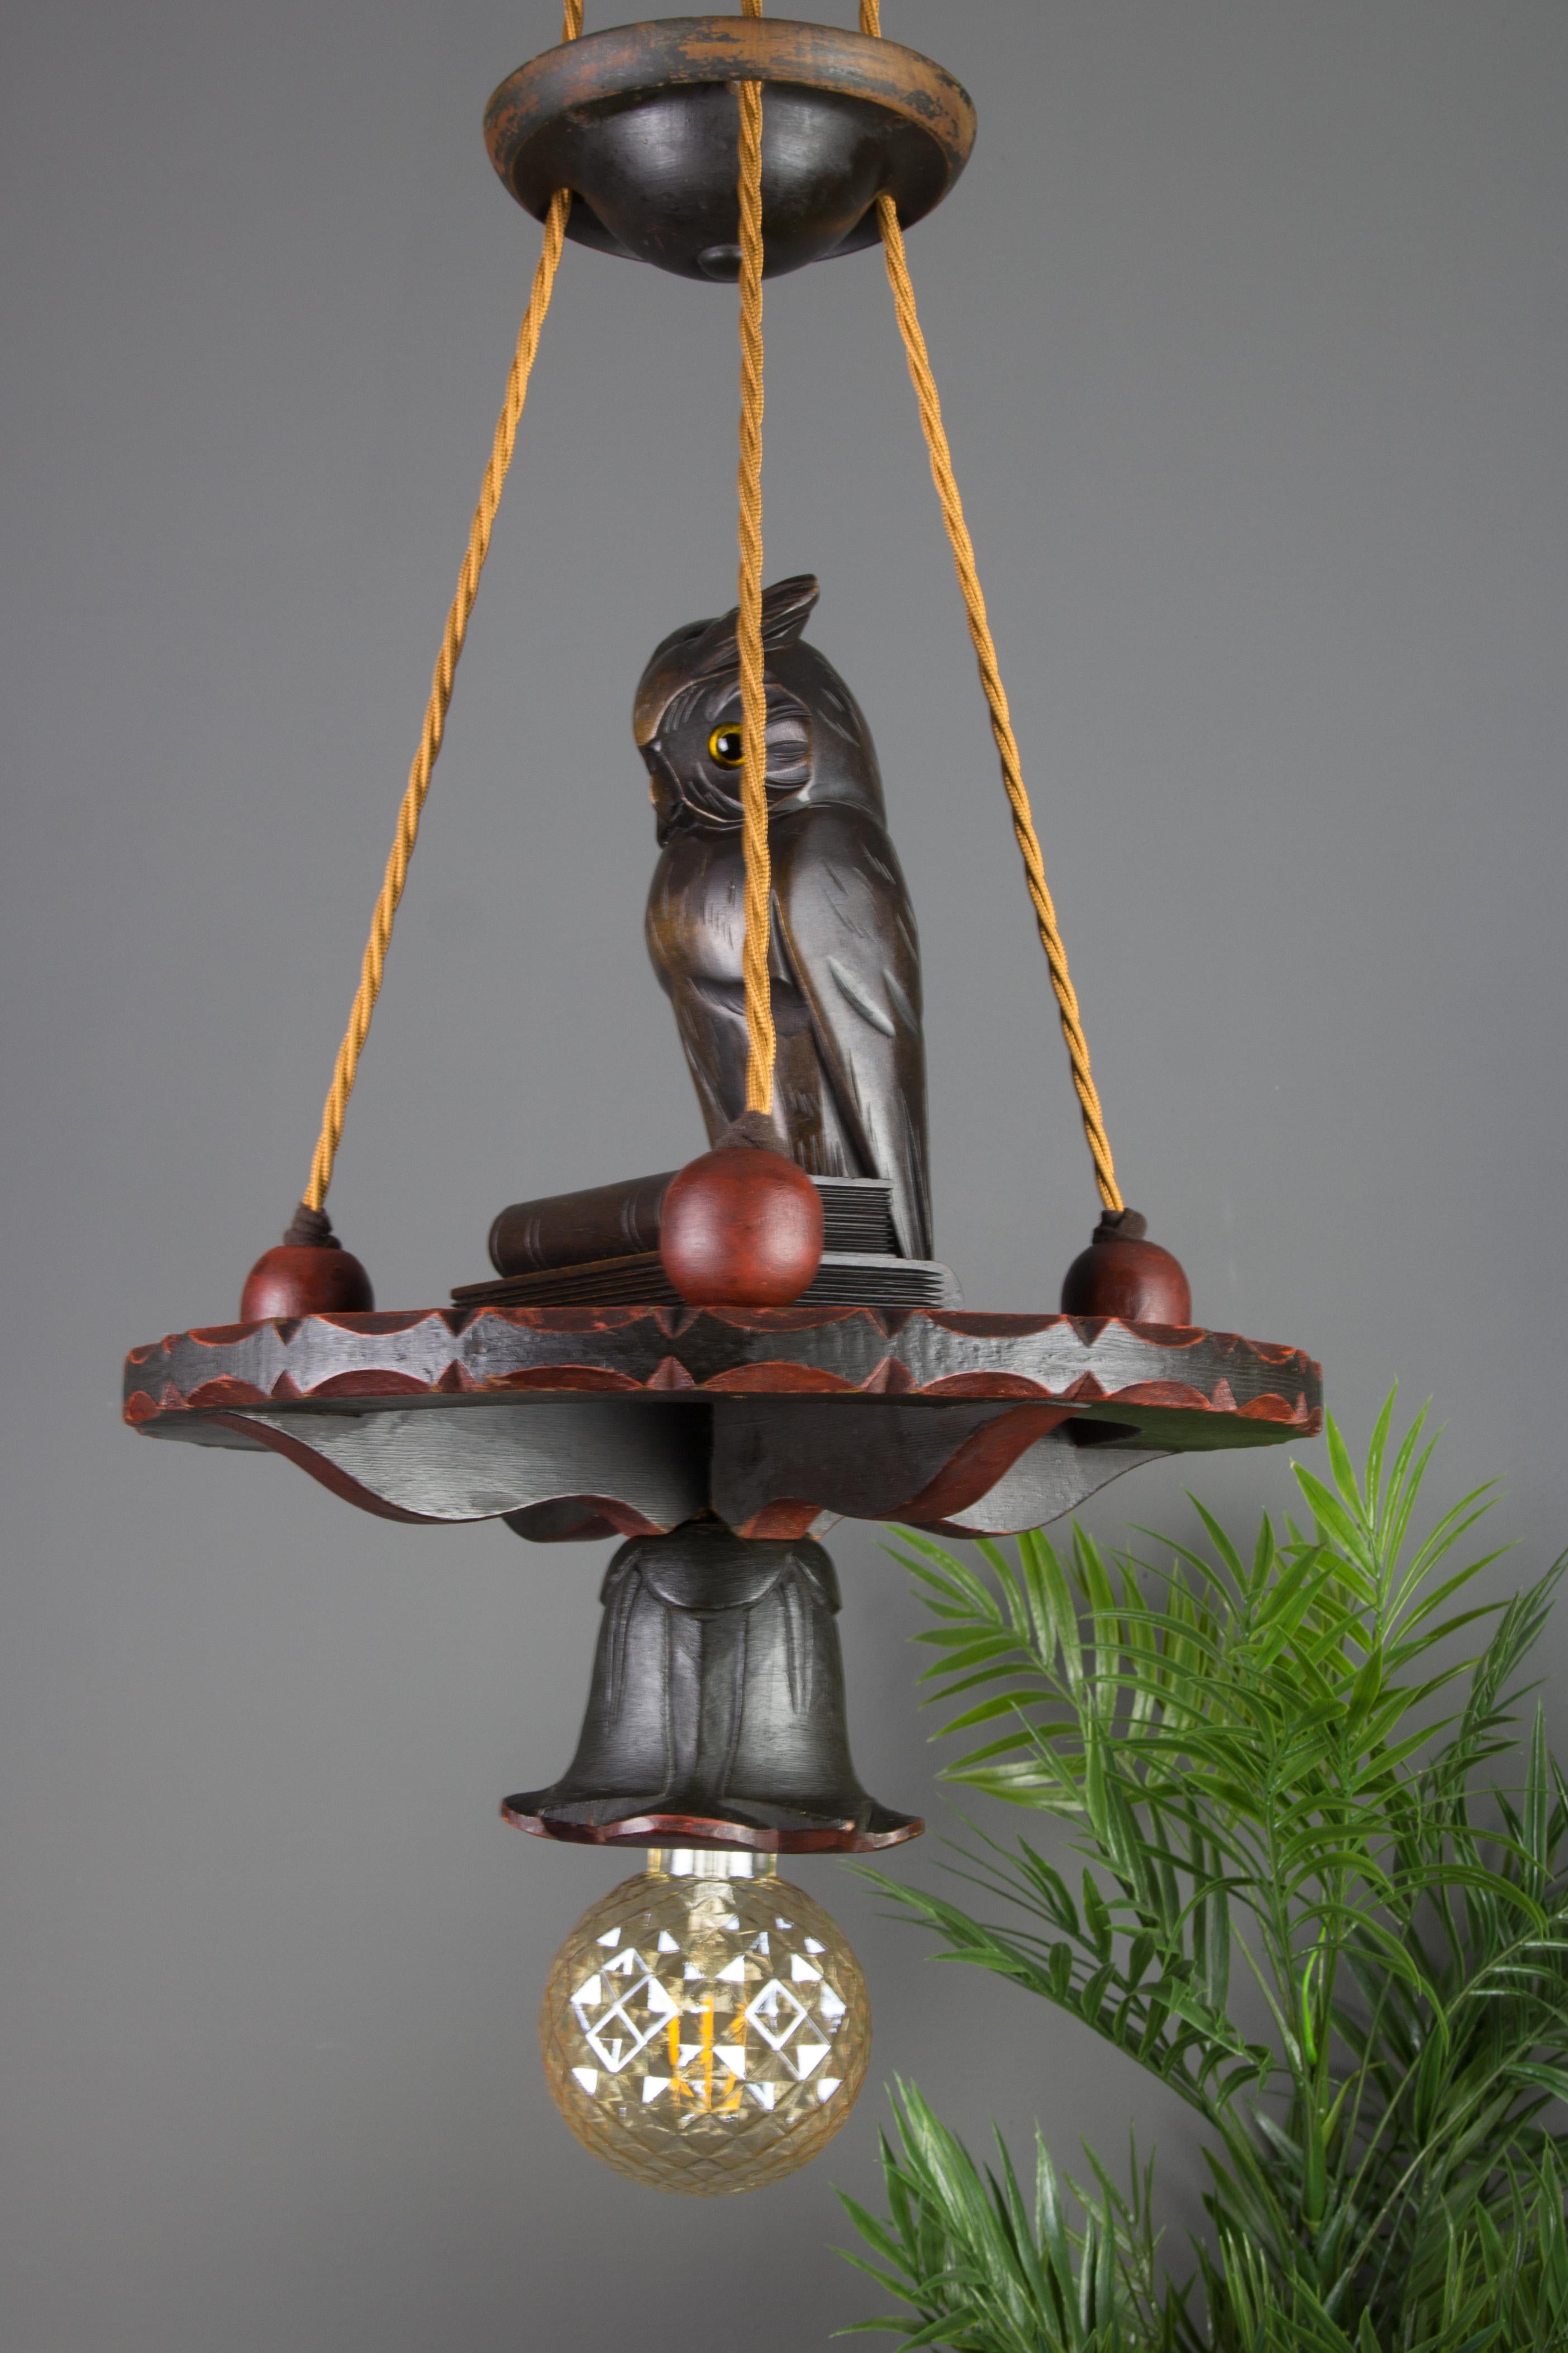 Early 20th Century German Hand Carved Wooden Pendant Light Chandelier with Owl Sculpture, 1920s